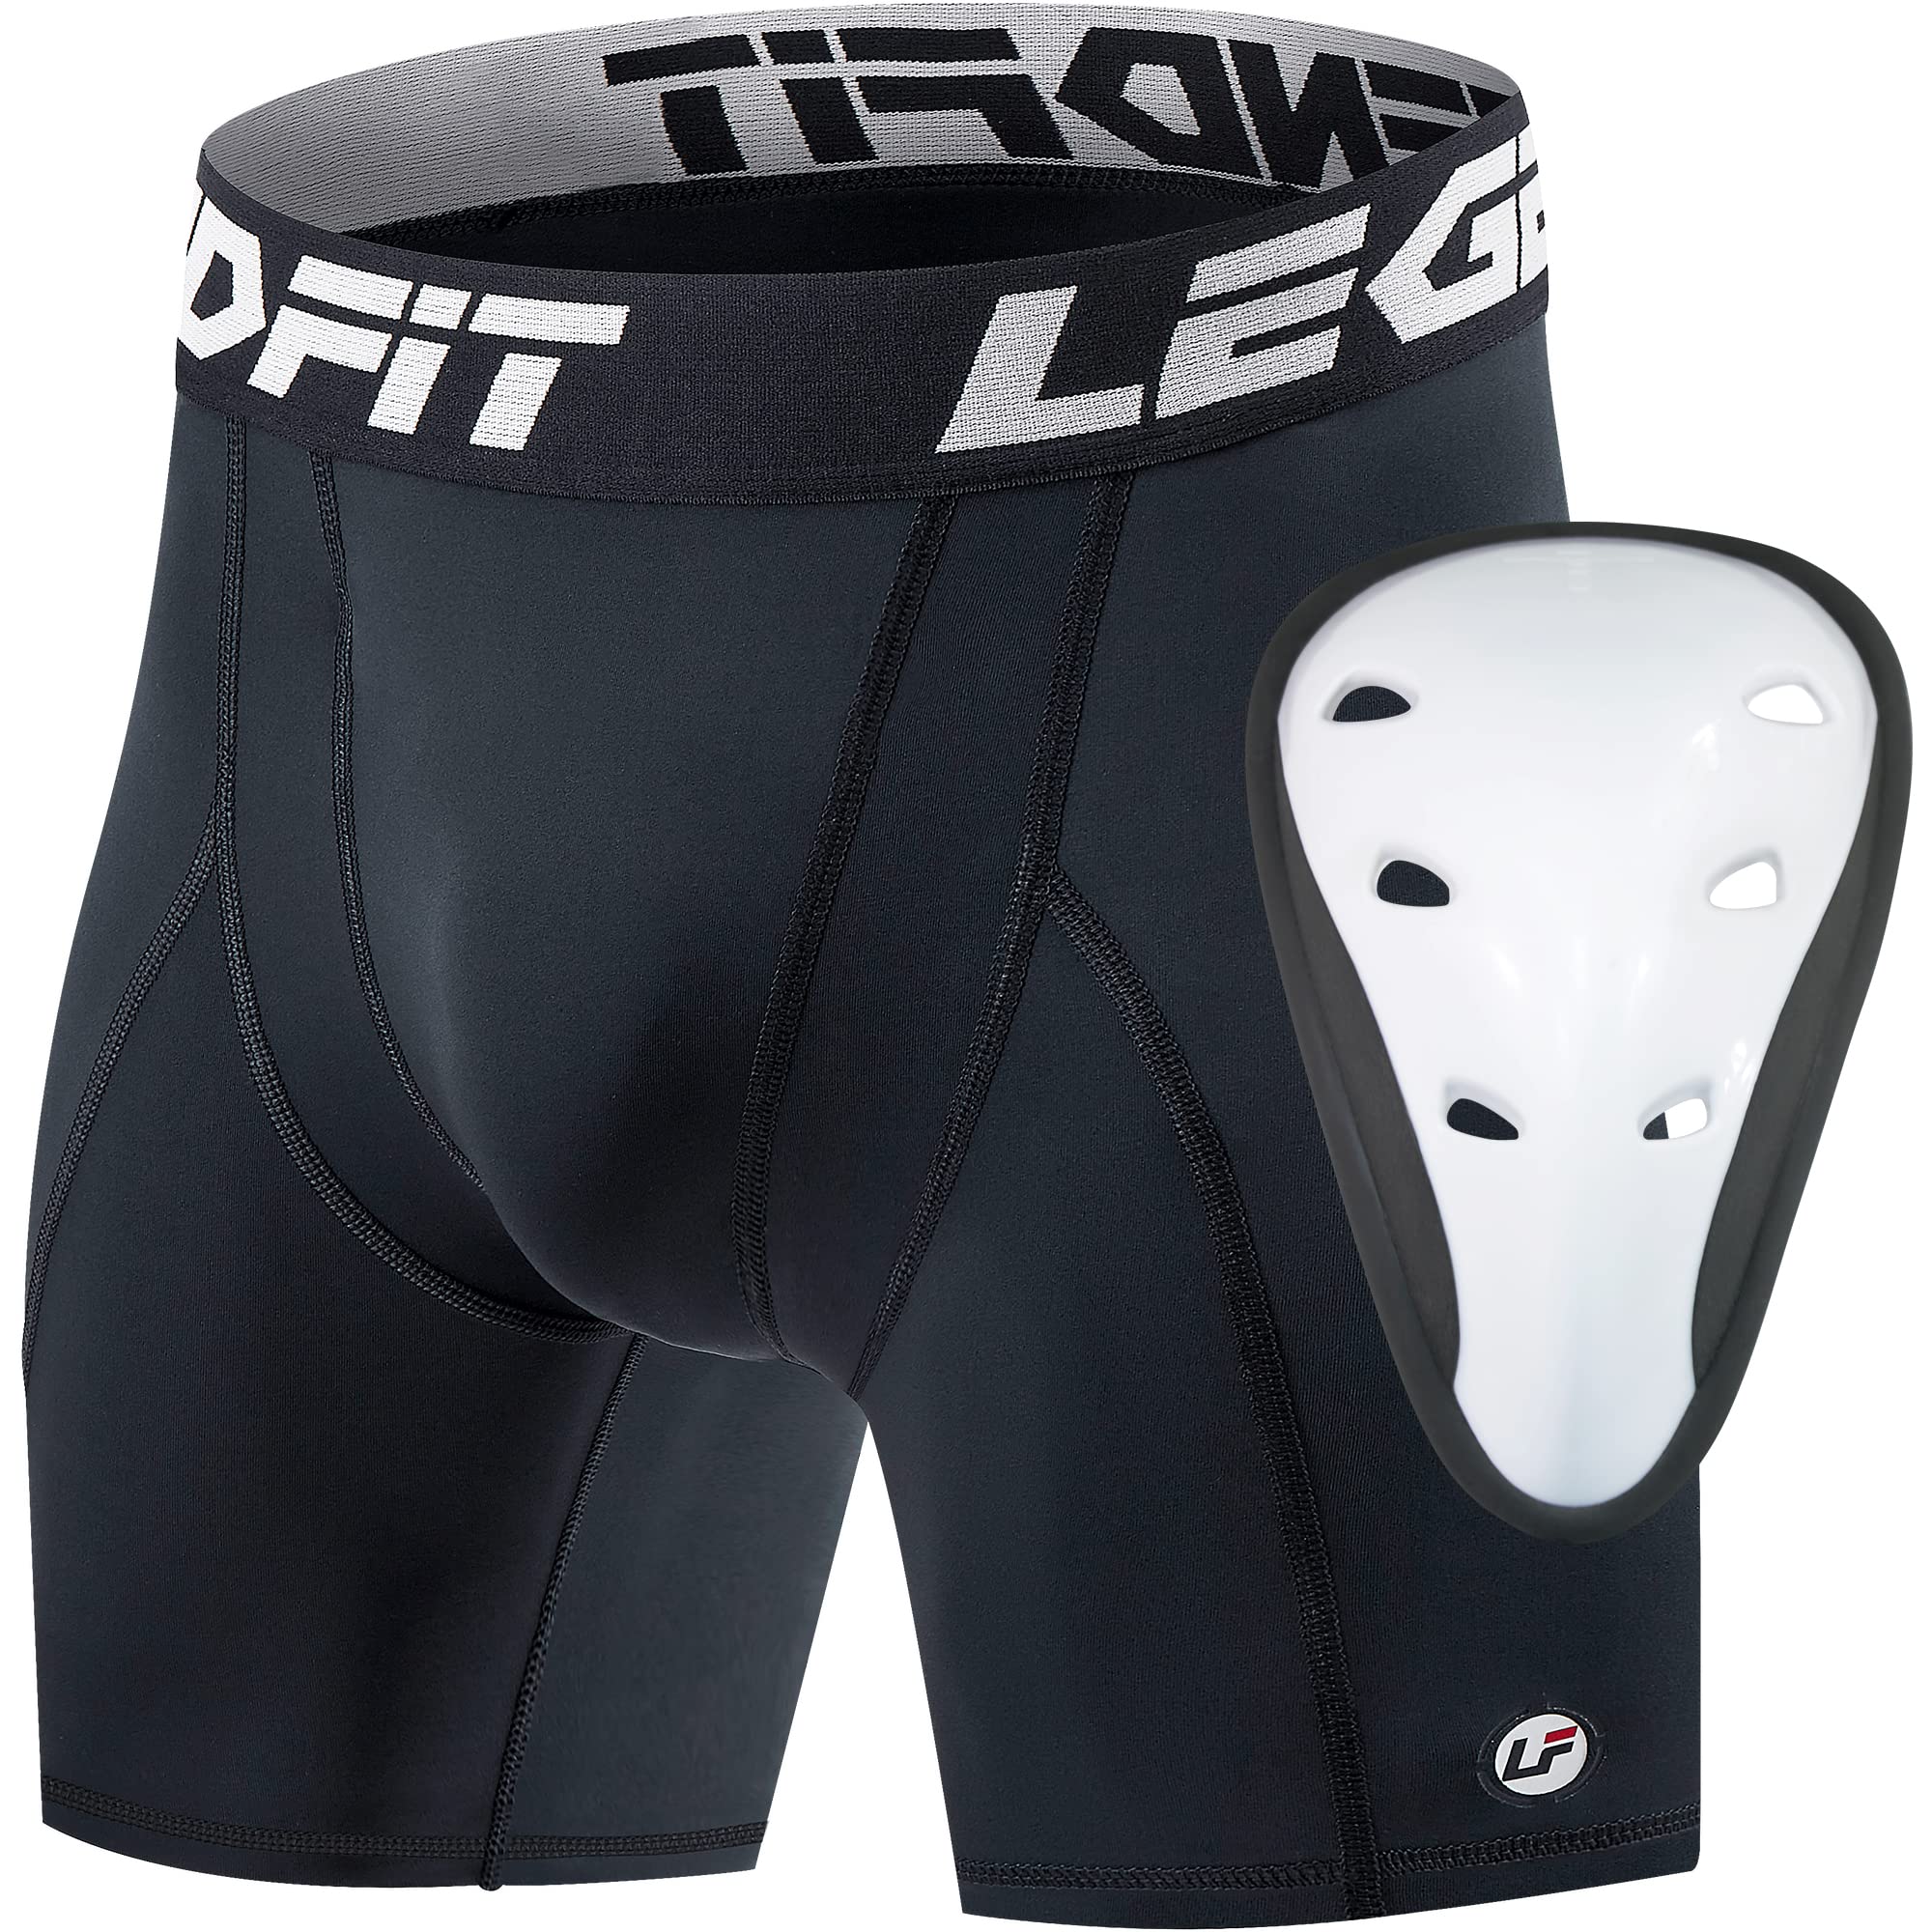 Legendfit Men's Sliding Shorts with Protective Cup Athletic